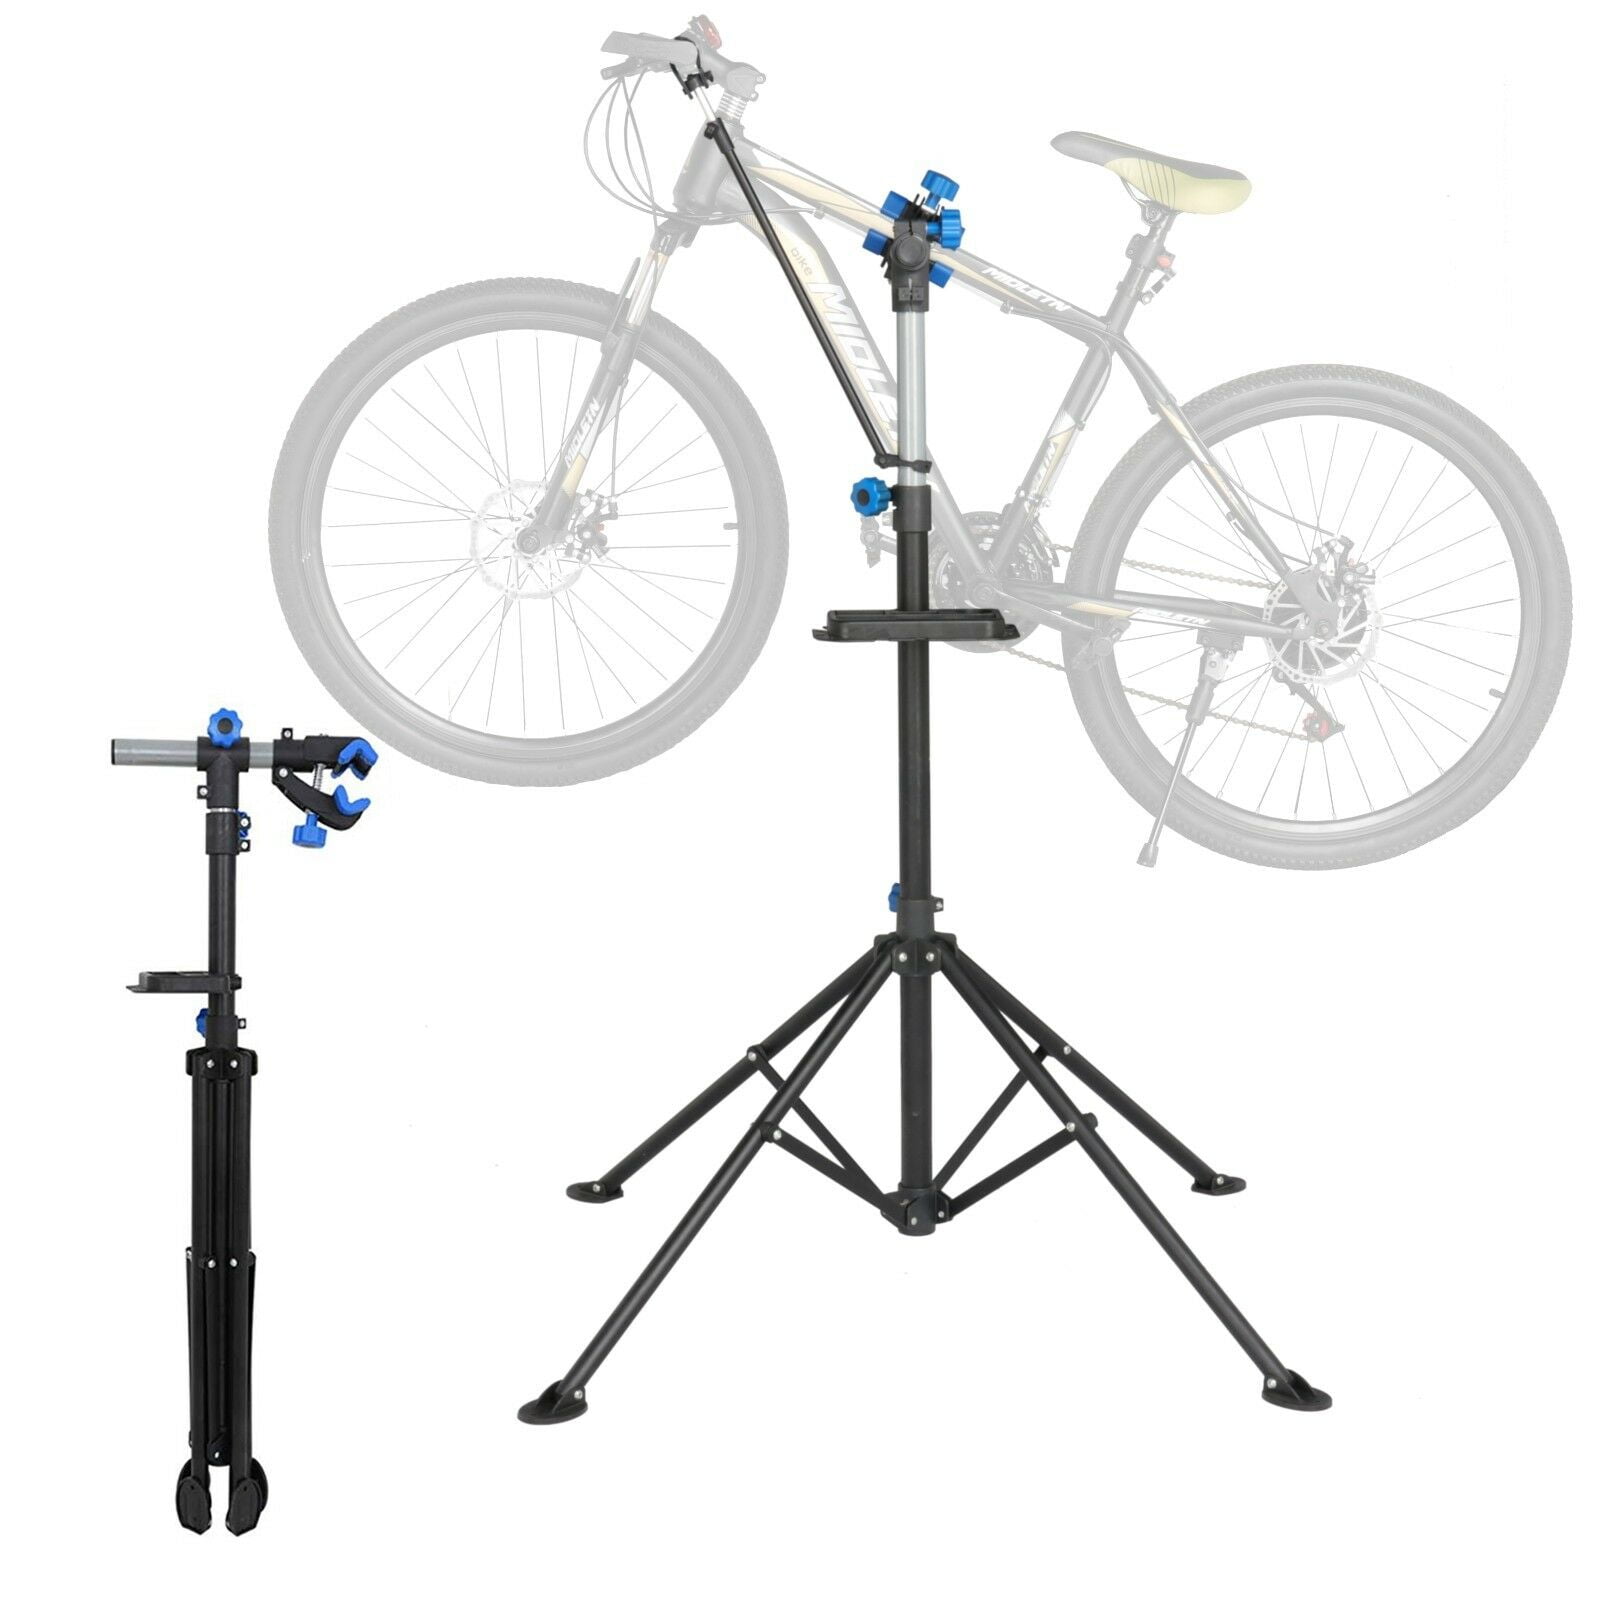 Adjustable Bike Clamp Bicycle Repair Stand Maintenance Cycle Work Workstand Home 